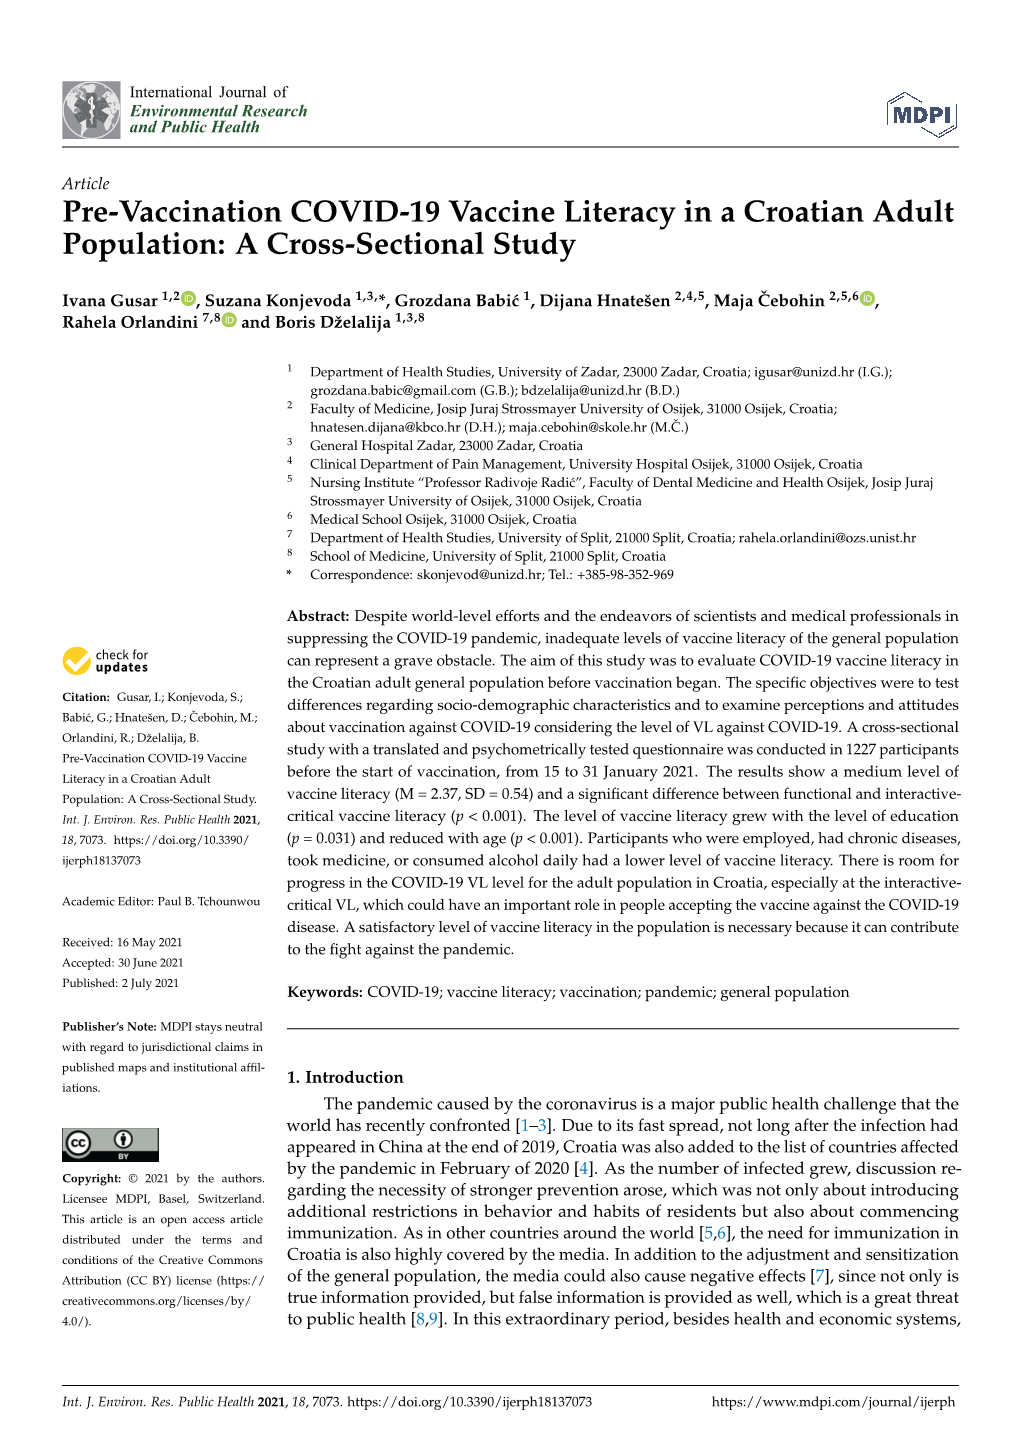 Pre-Vaccination COVID-19 Vaccine Literacy in a Croatian Adult Population: a Cross-Sectional Study